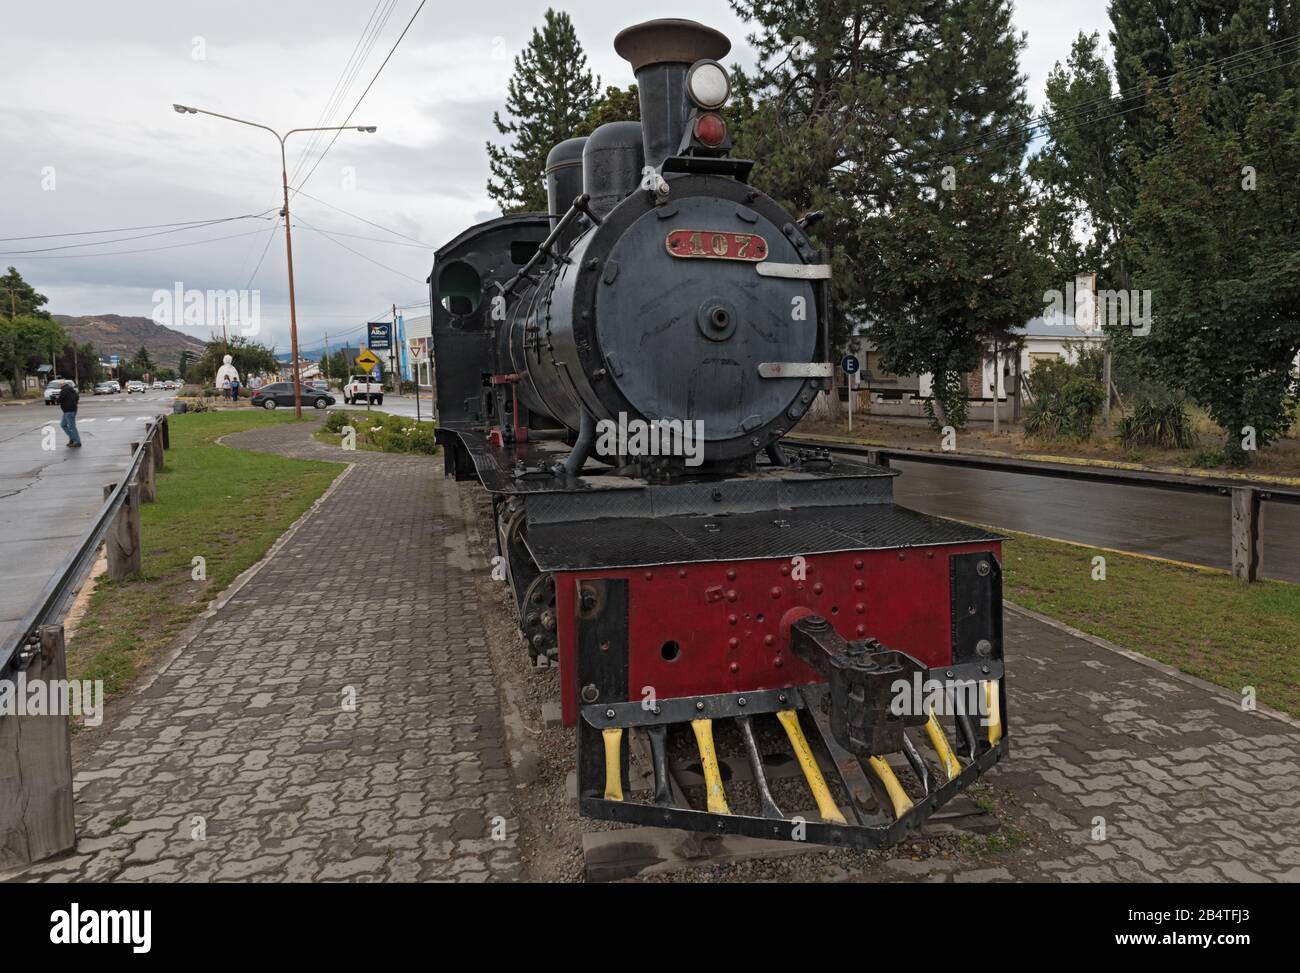 Old patagonian express locomotive La Trochita in the city of Esquel, Argentina Stock Photo